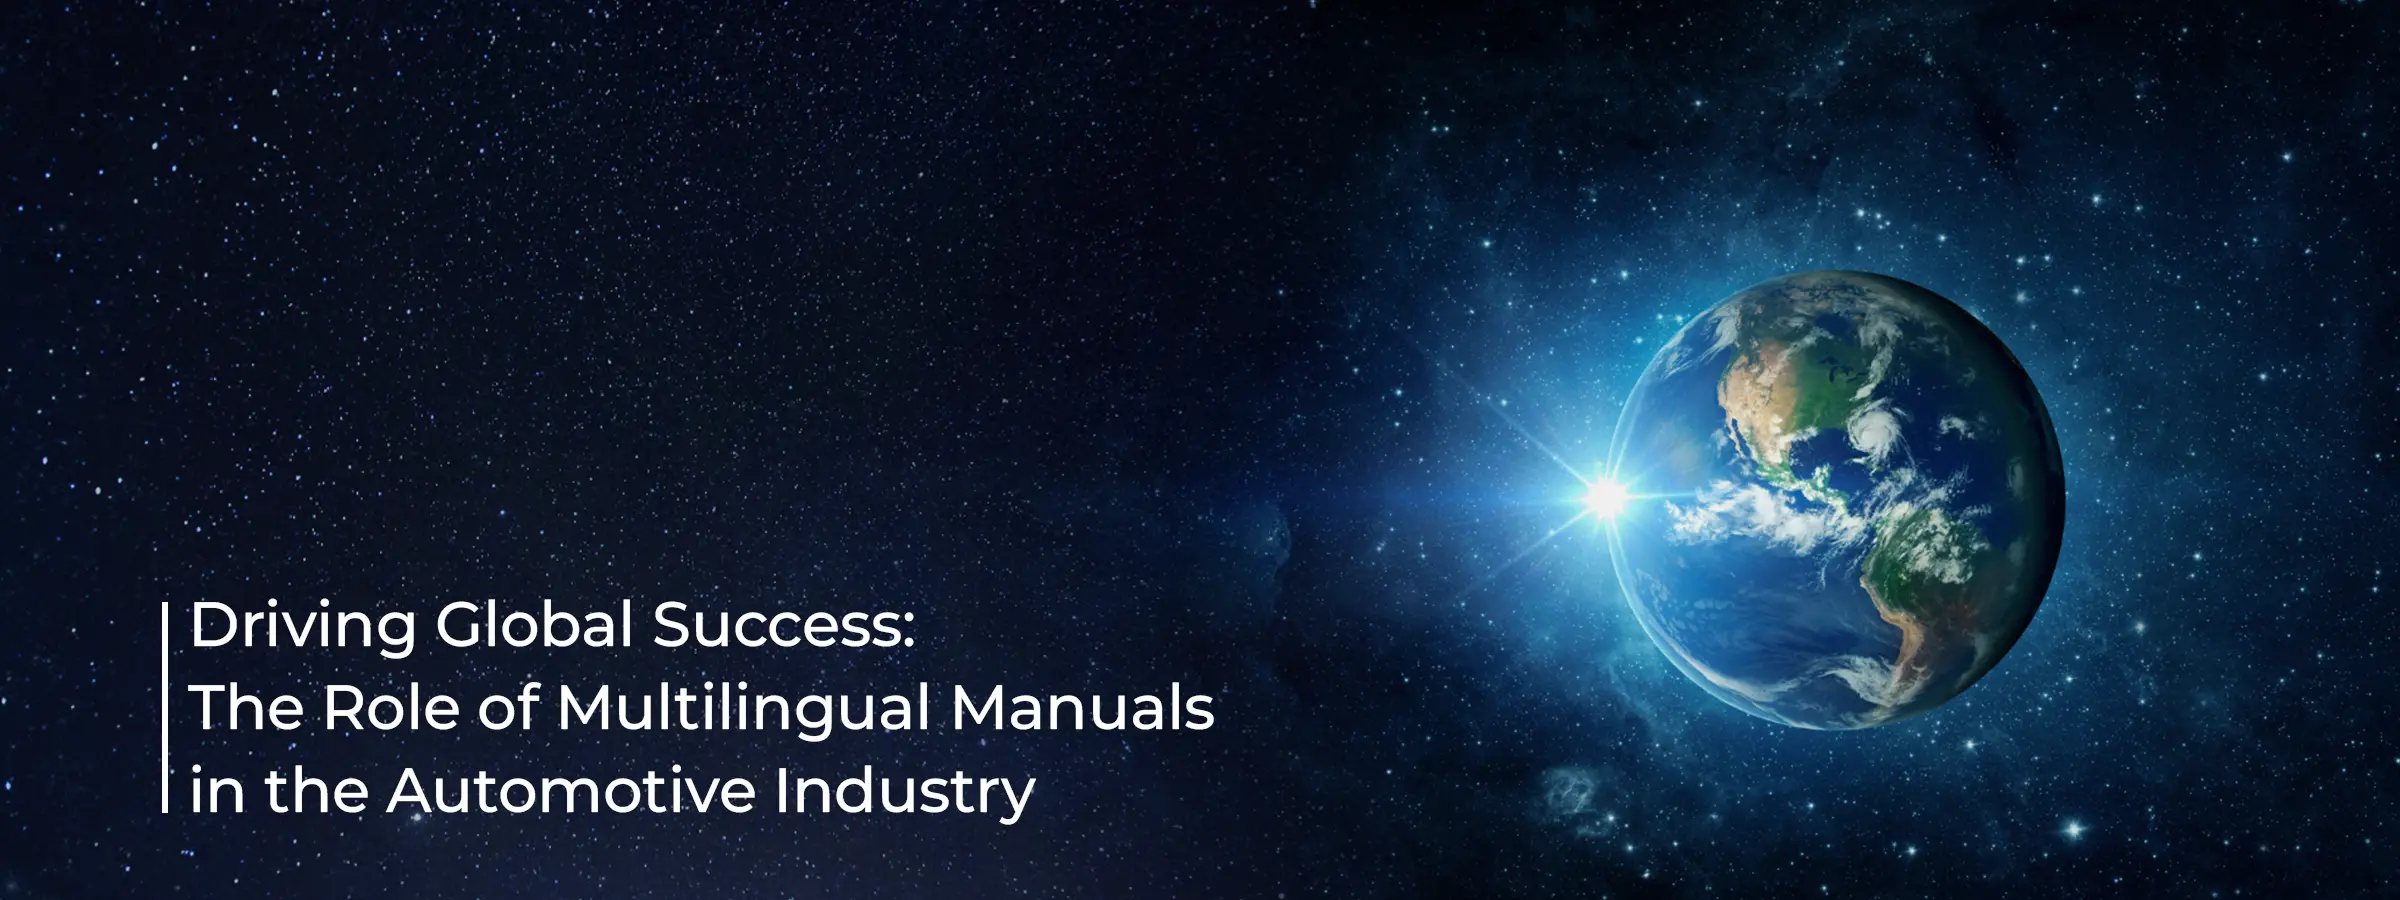 multilingual-manuals-in-the-automotive-industry